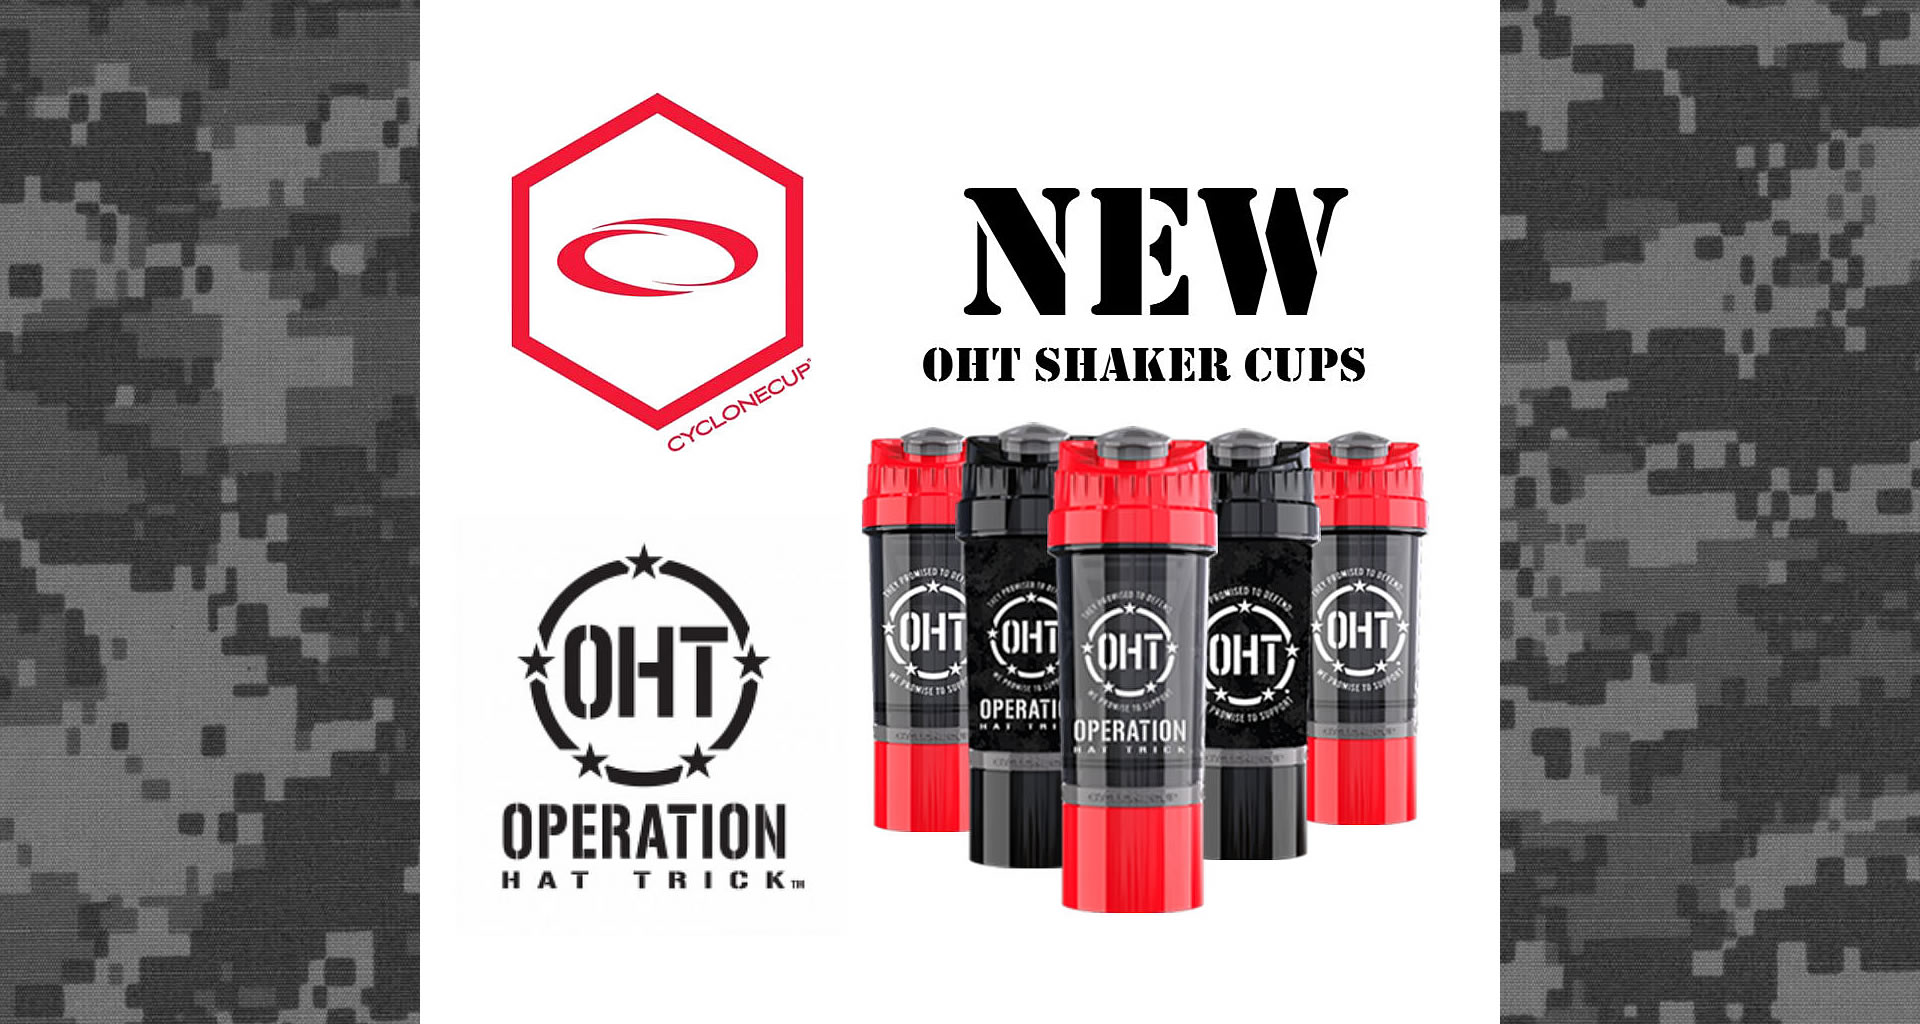 Cyclone Cup Partners with Operation Hat Trick - Operation Hat Trick